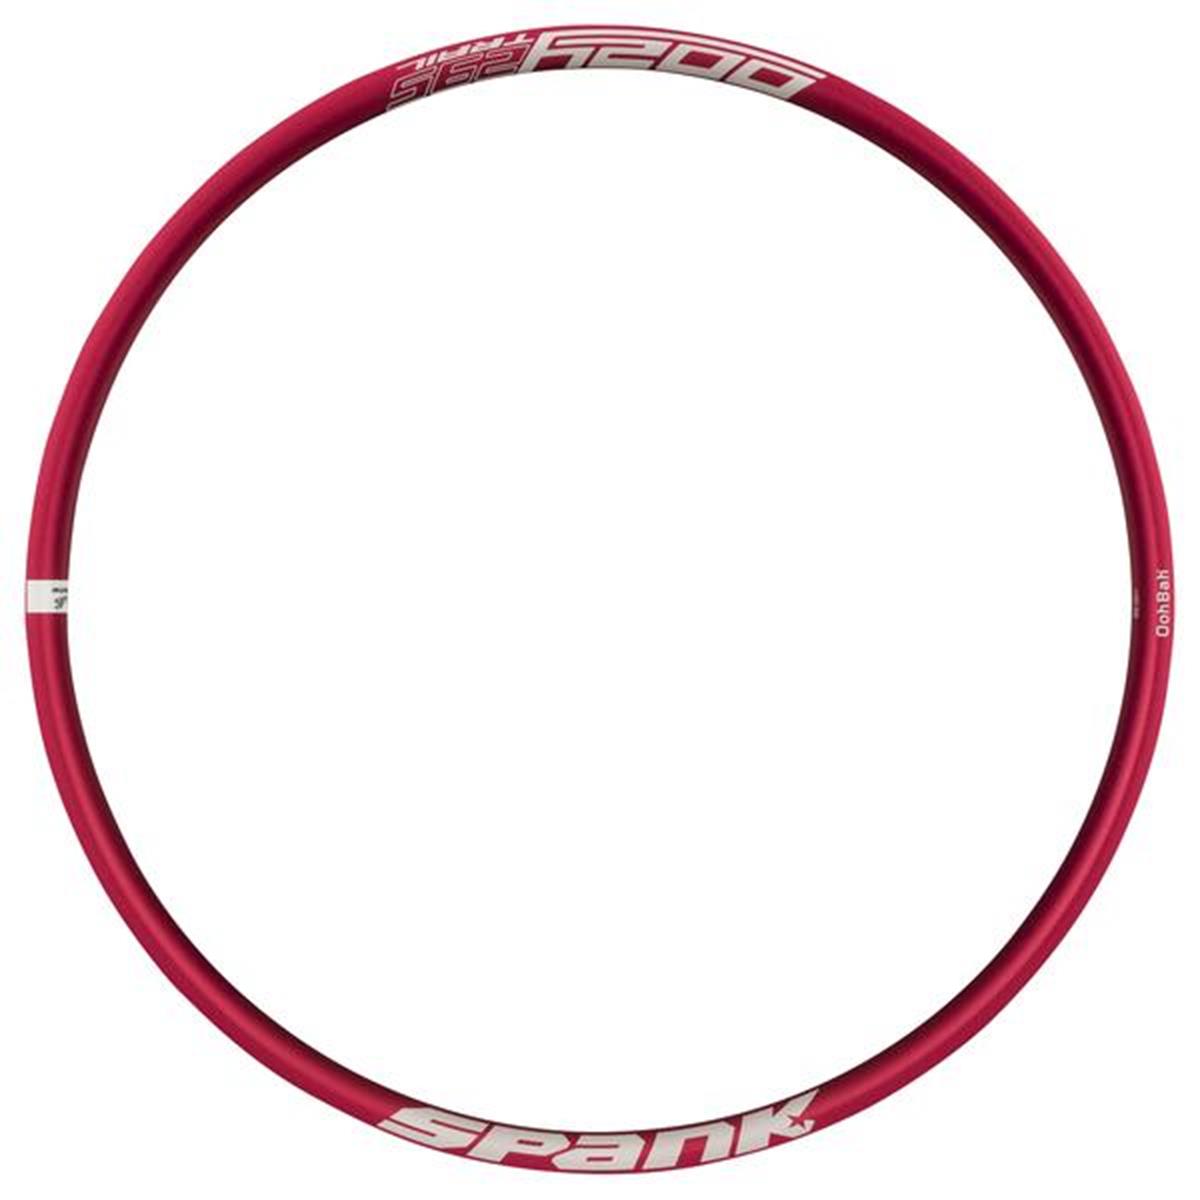 Spank Jante MTB Oozy Trail 295 Red, shotpeen, 26 Inches x 29 mm